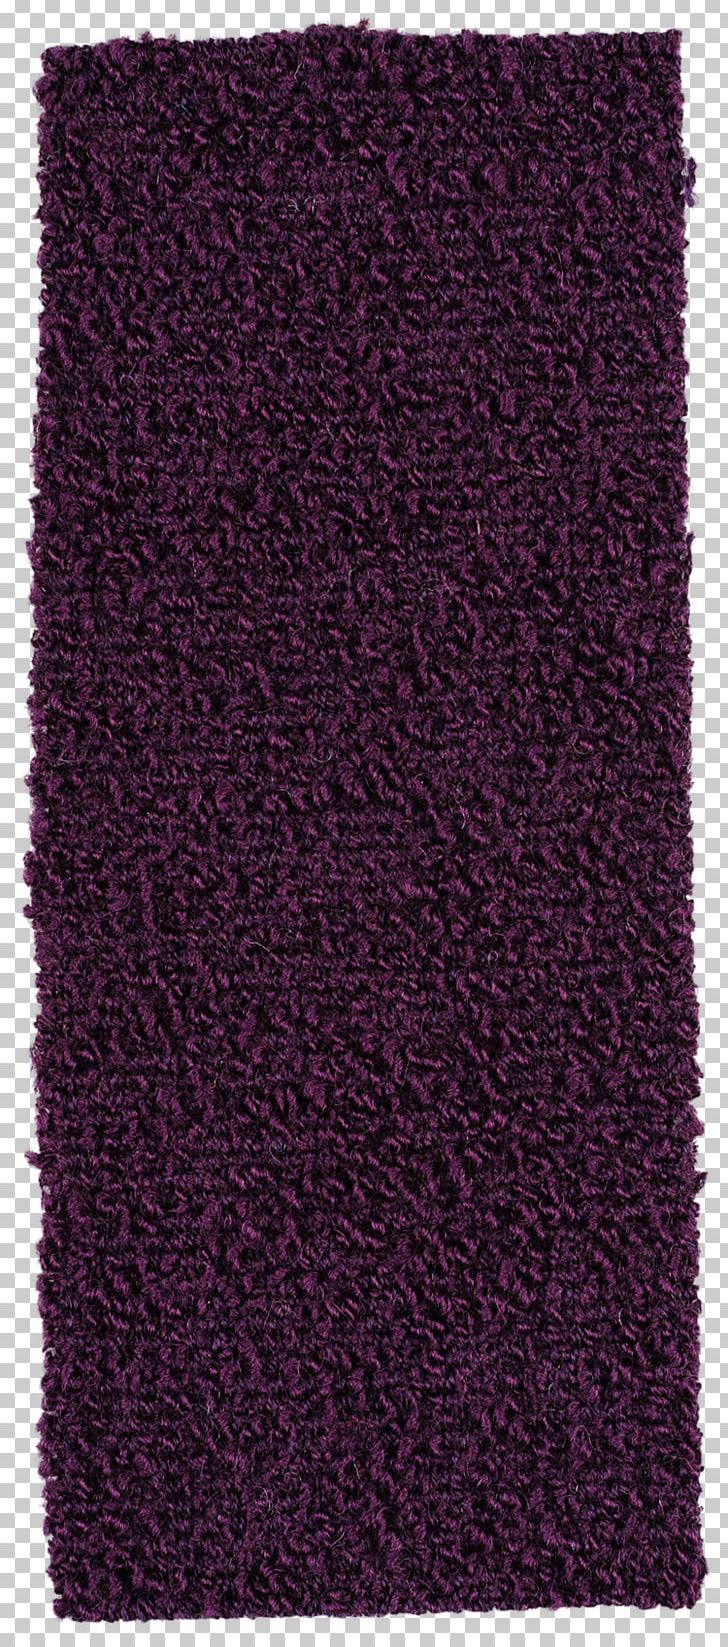 Purple Magenta Violet Lilac Wool PNG, Clipart, Art, Lilac, Magenta, Maroon, Purple Free PNG Download